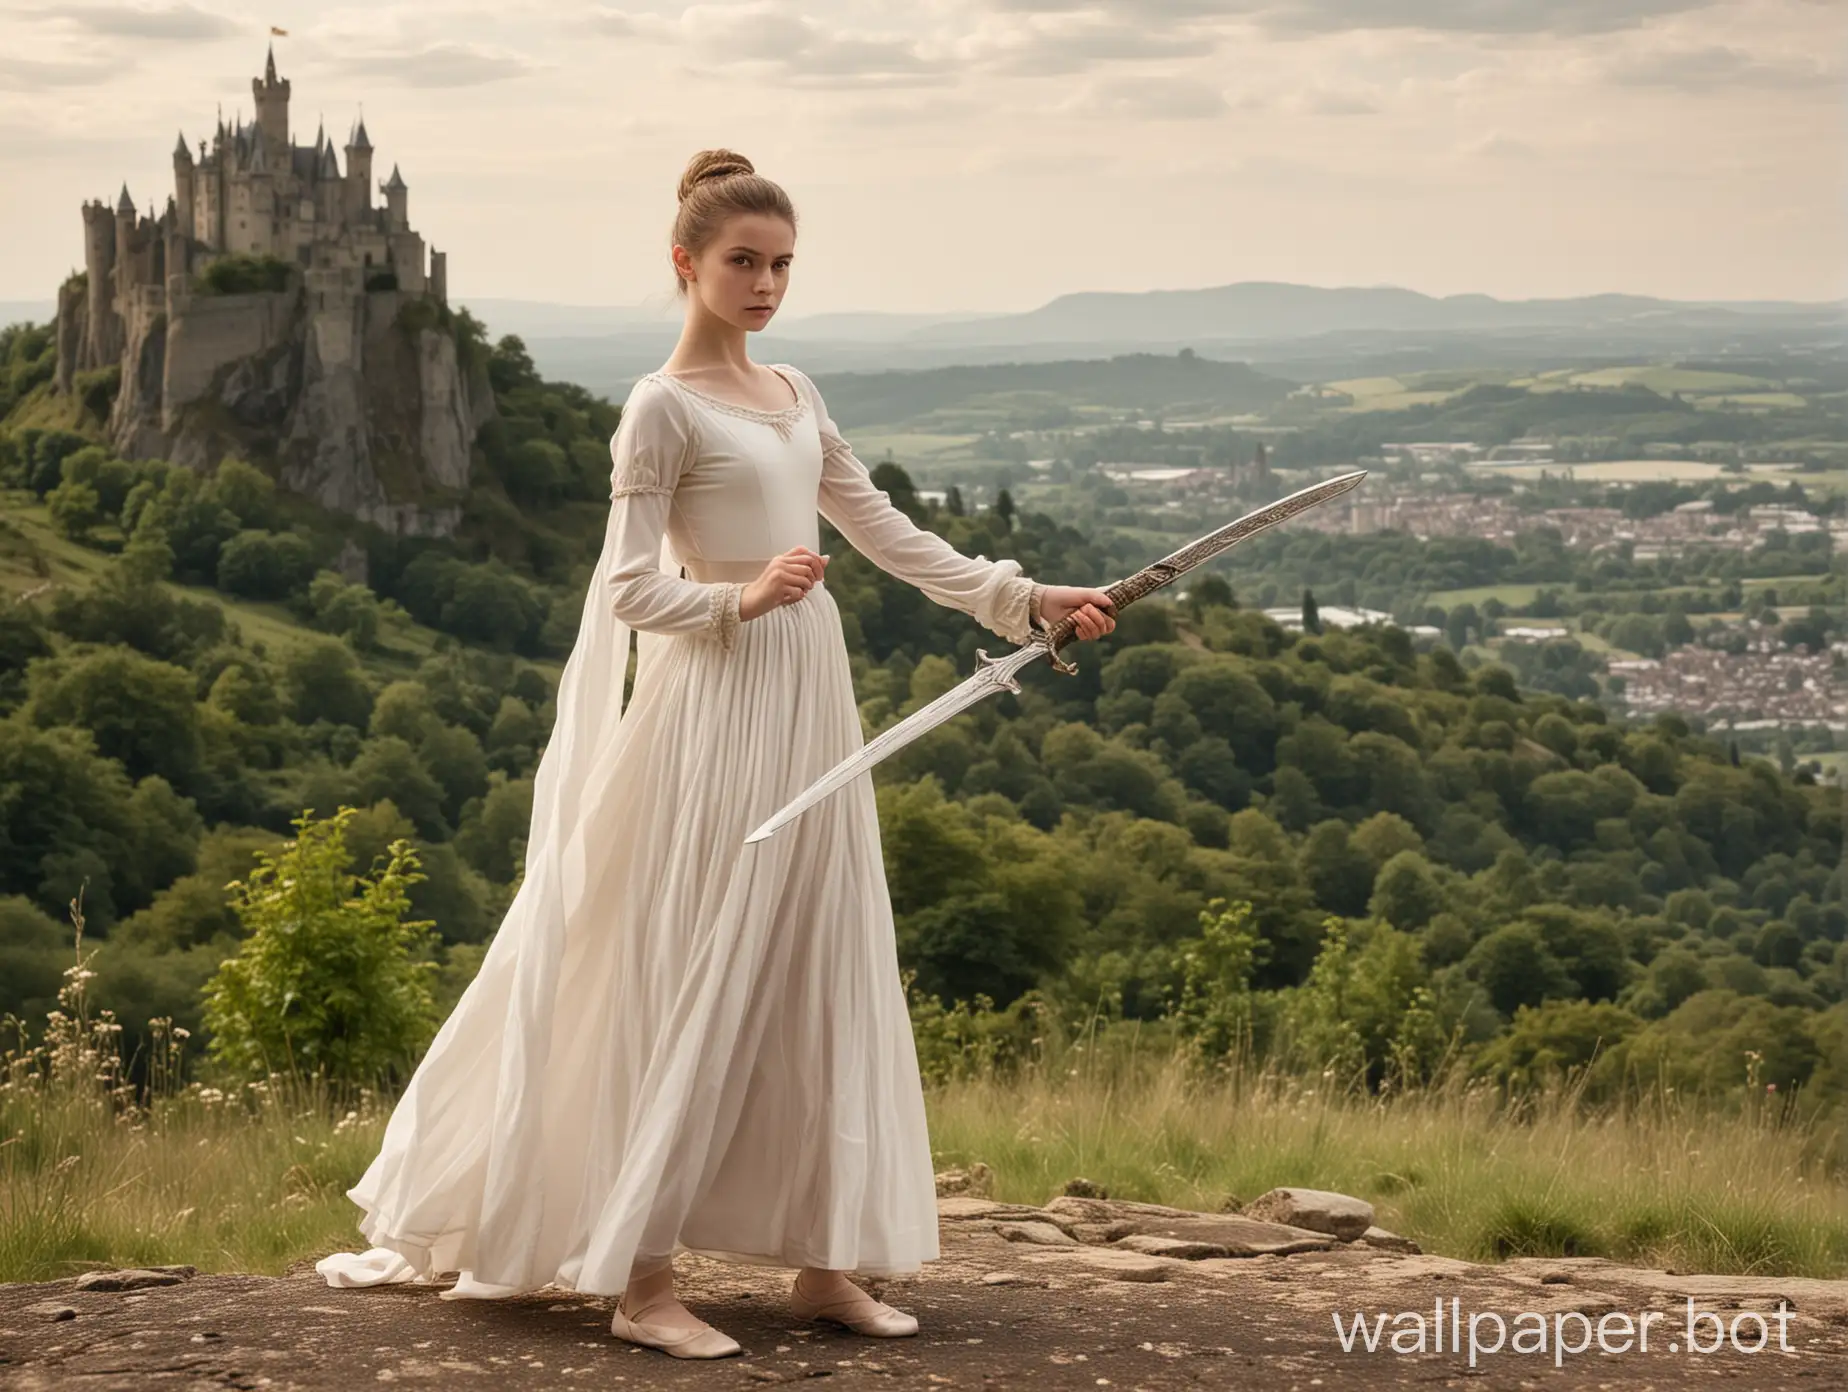 a Woman aged 25 in a long white gown, she is holding a sword. Standing beside her is a girl aged 10 in ballet attire and pointe shoes. There is a castle on a hilltop in the distance.